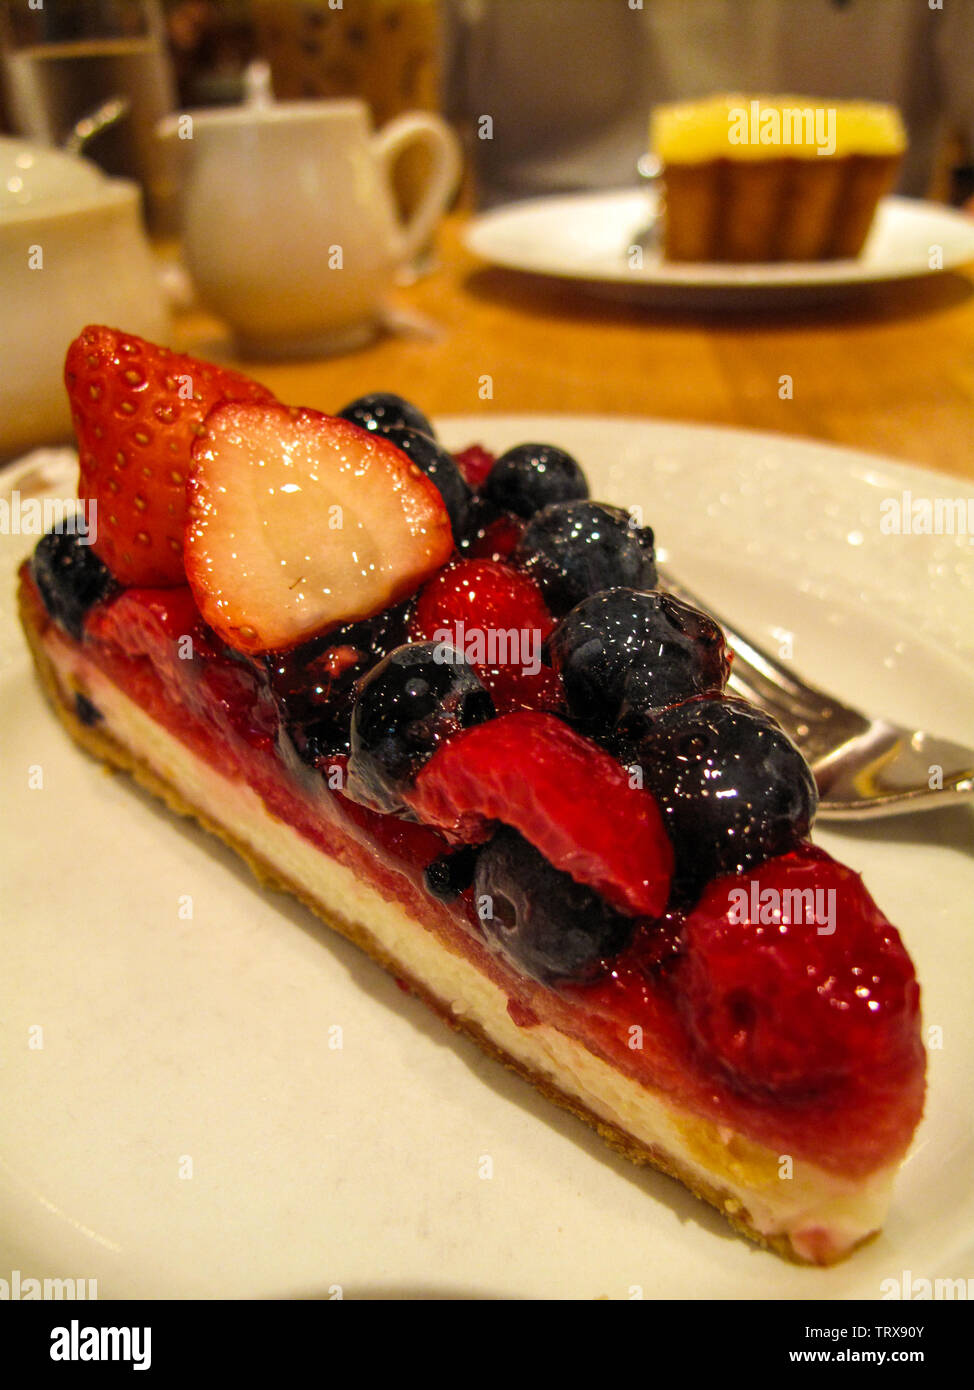 Cheesecake topped with lots of fresh strawberries, raspberries and blueberries in a cafe. Stock Photo